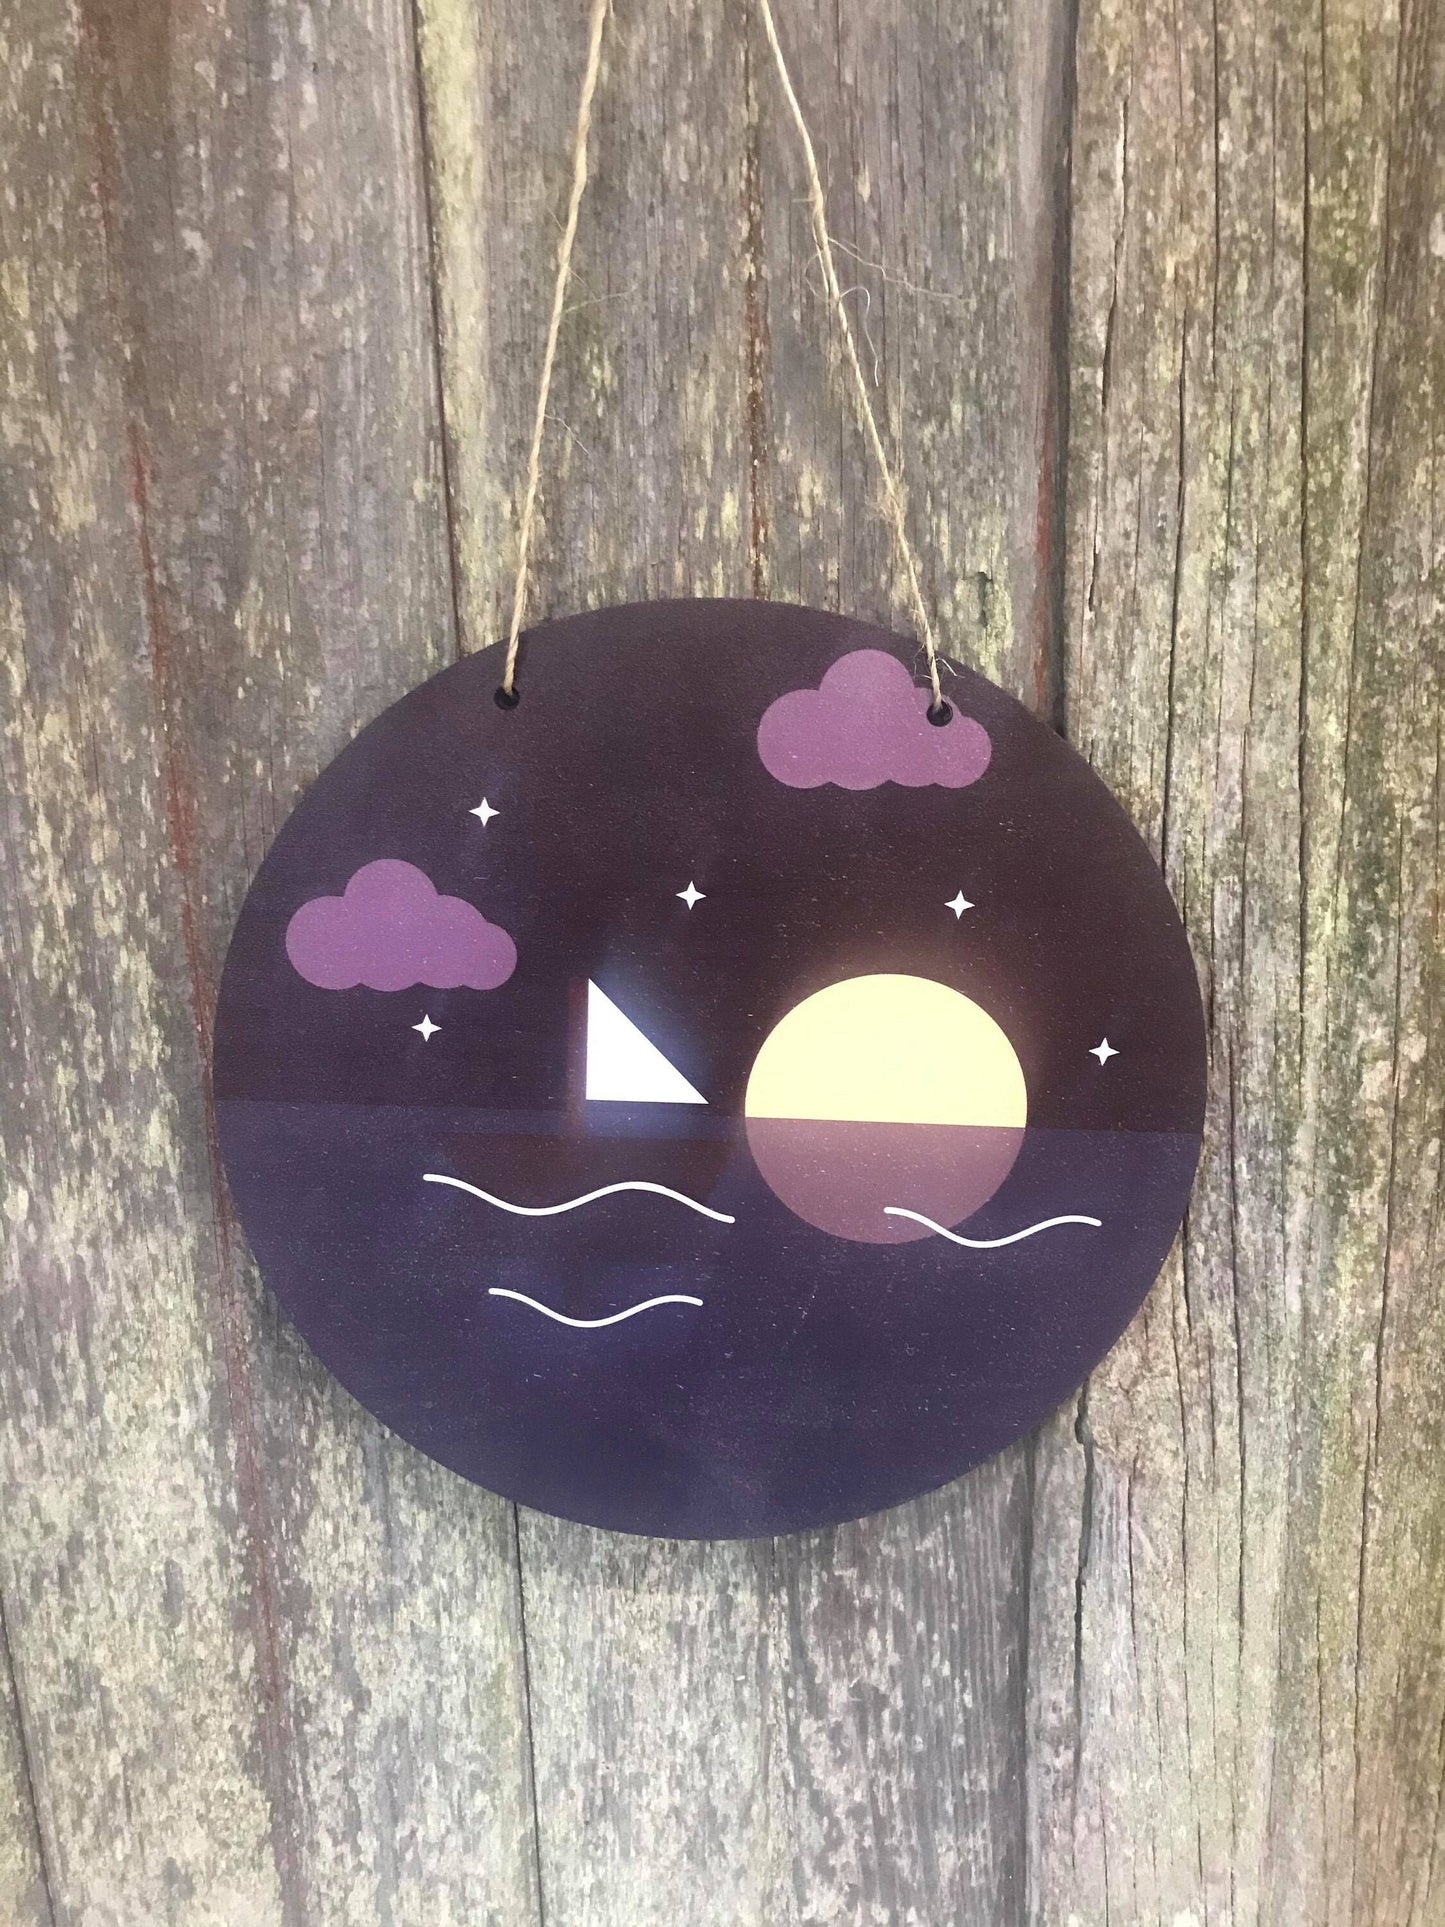 Ocean Purple Night Time Sign Round Sailboat Scenic Beach Water Wood Sky Wall Hanger Nursery Decor Plaque Wall Art Color Wood Print